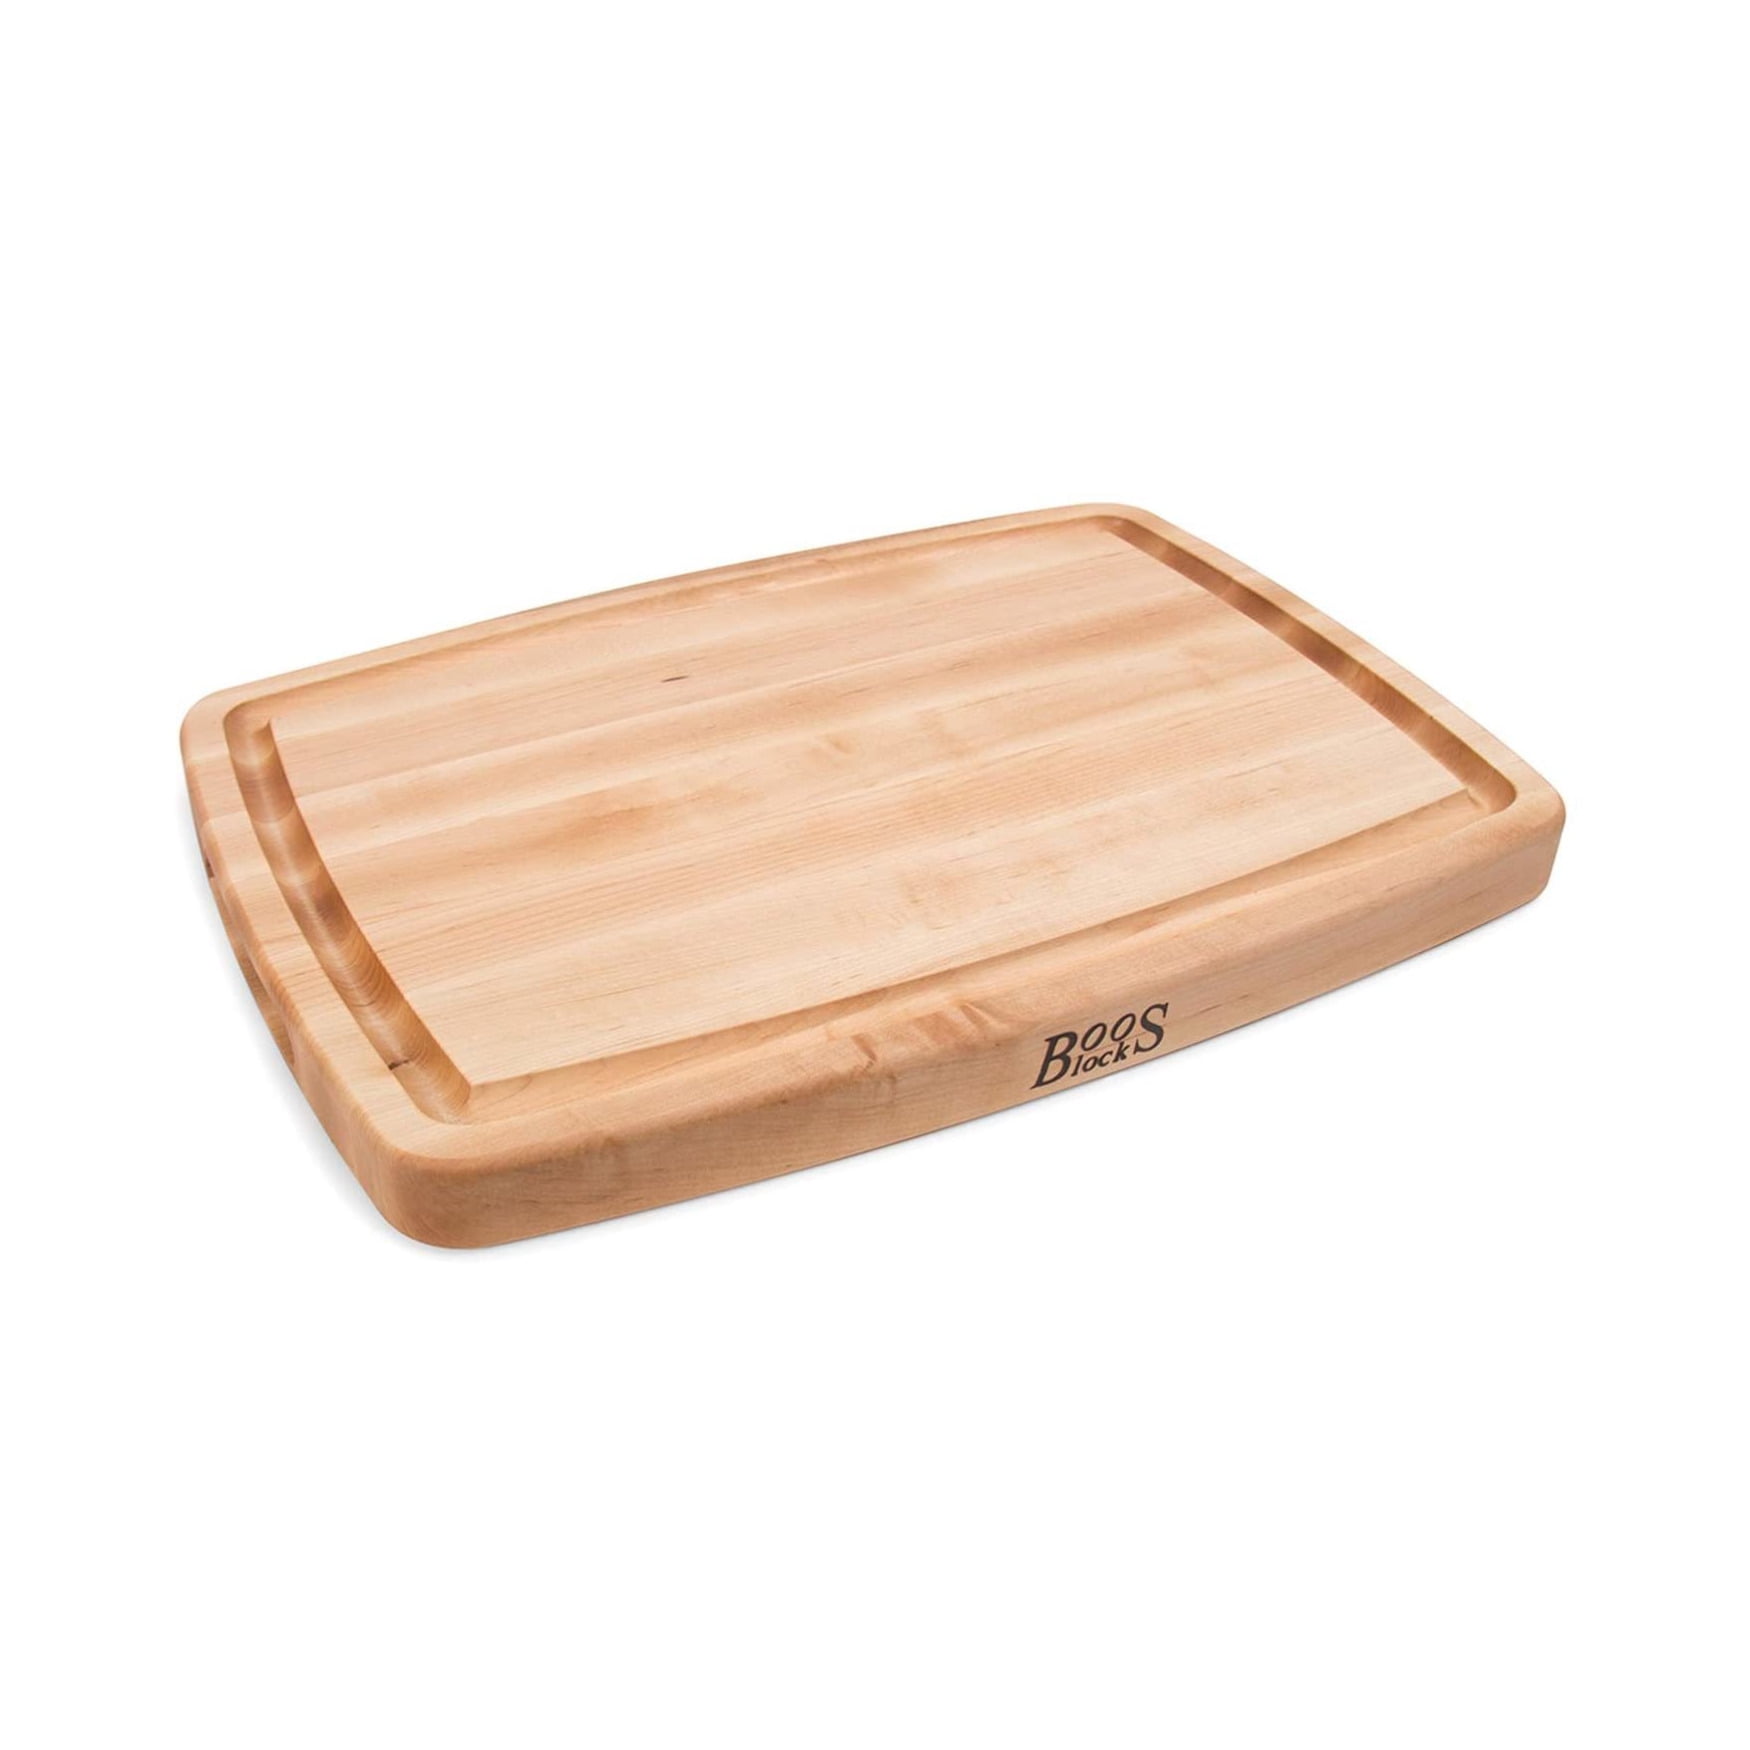 John Boos Reversible Maple Wood Cutting Board with Groove 20 x 14 x 1.5 Inch 